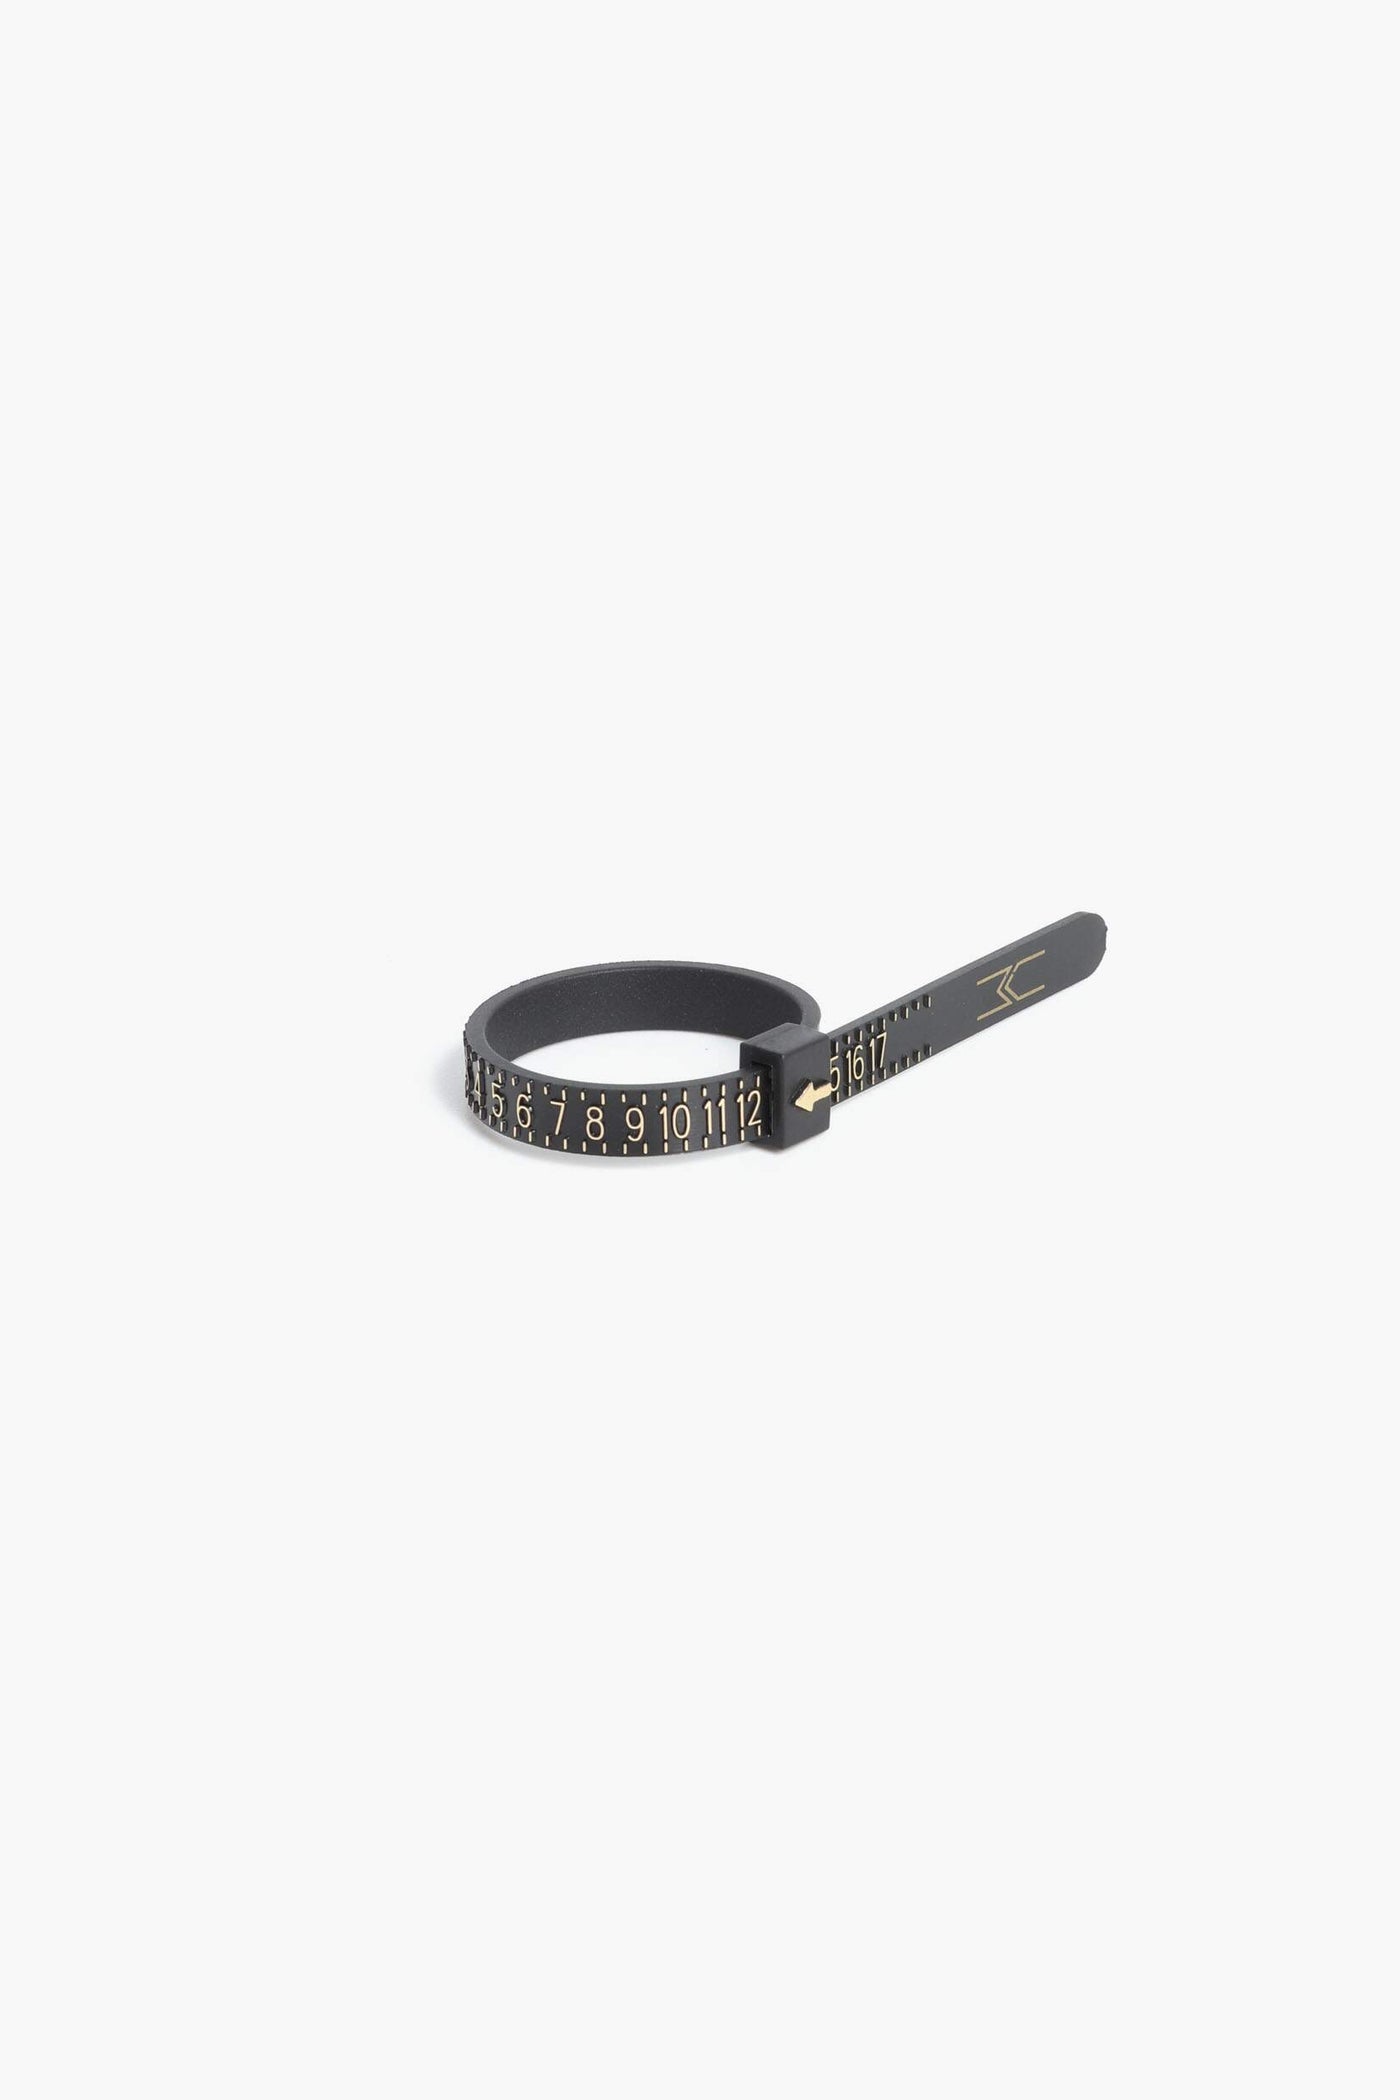 Marrin Costello Jewelry custom ring sizer, a black reusable zip tie, with ring sizes. To use: wrap around your finger until its comfortable. Your ring size is what the arrow is pointing to! Perfect for ordering rings online.